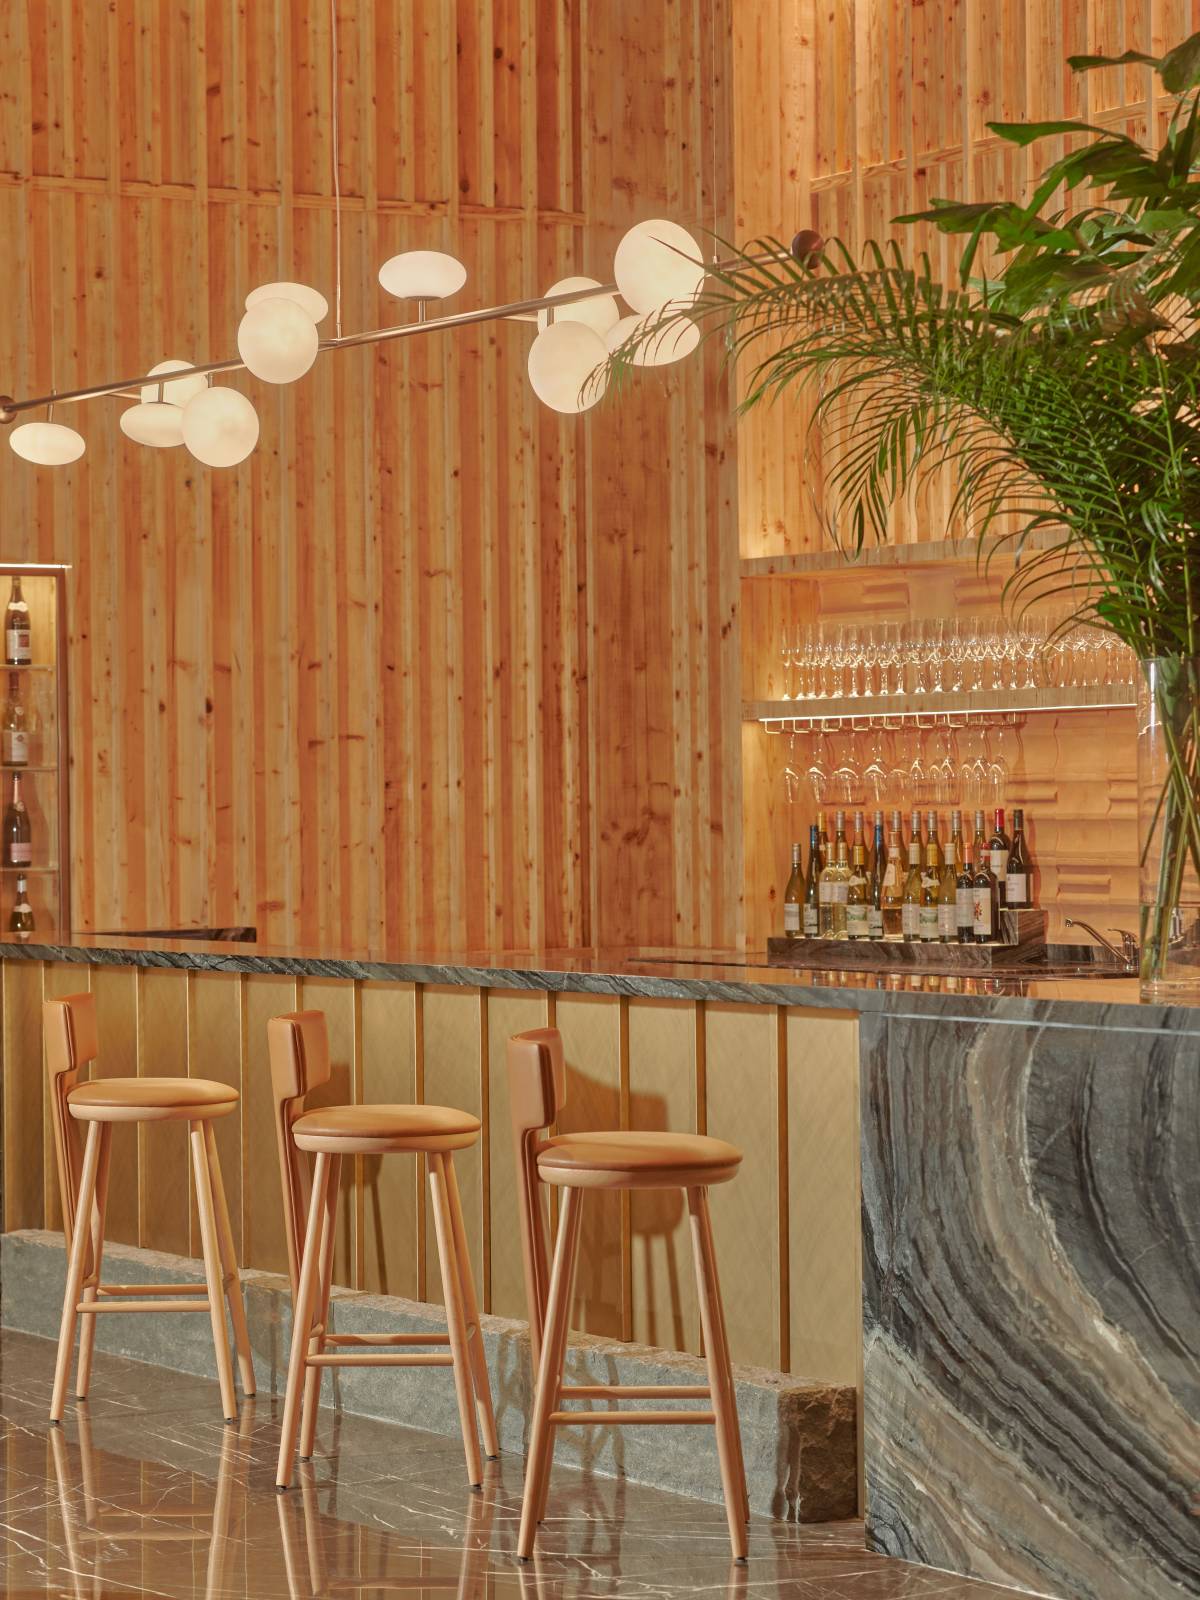 Amara’s Lobby Bar, An Intimate Space Designed For Meaningful Conversations, Debuts